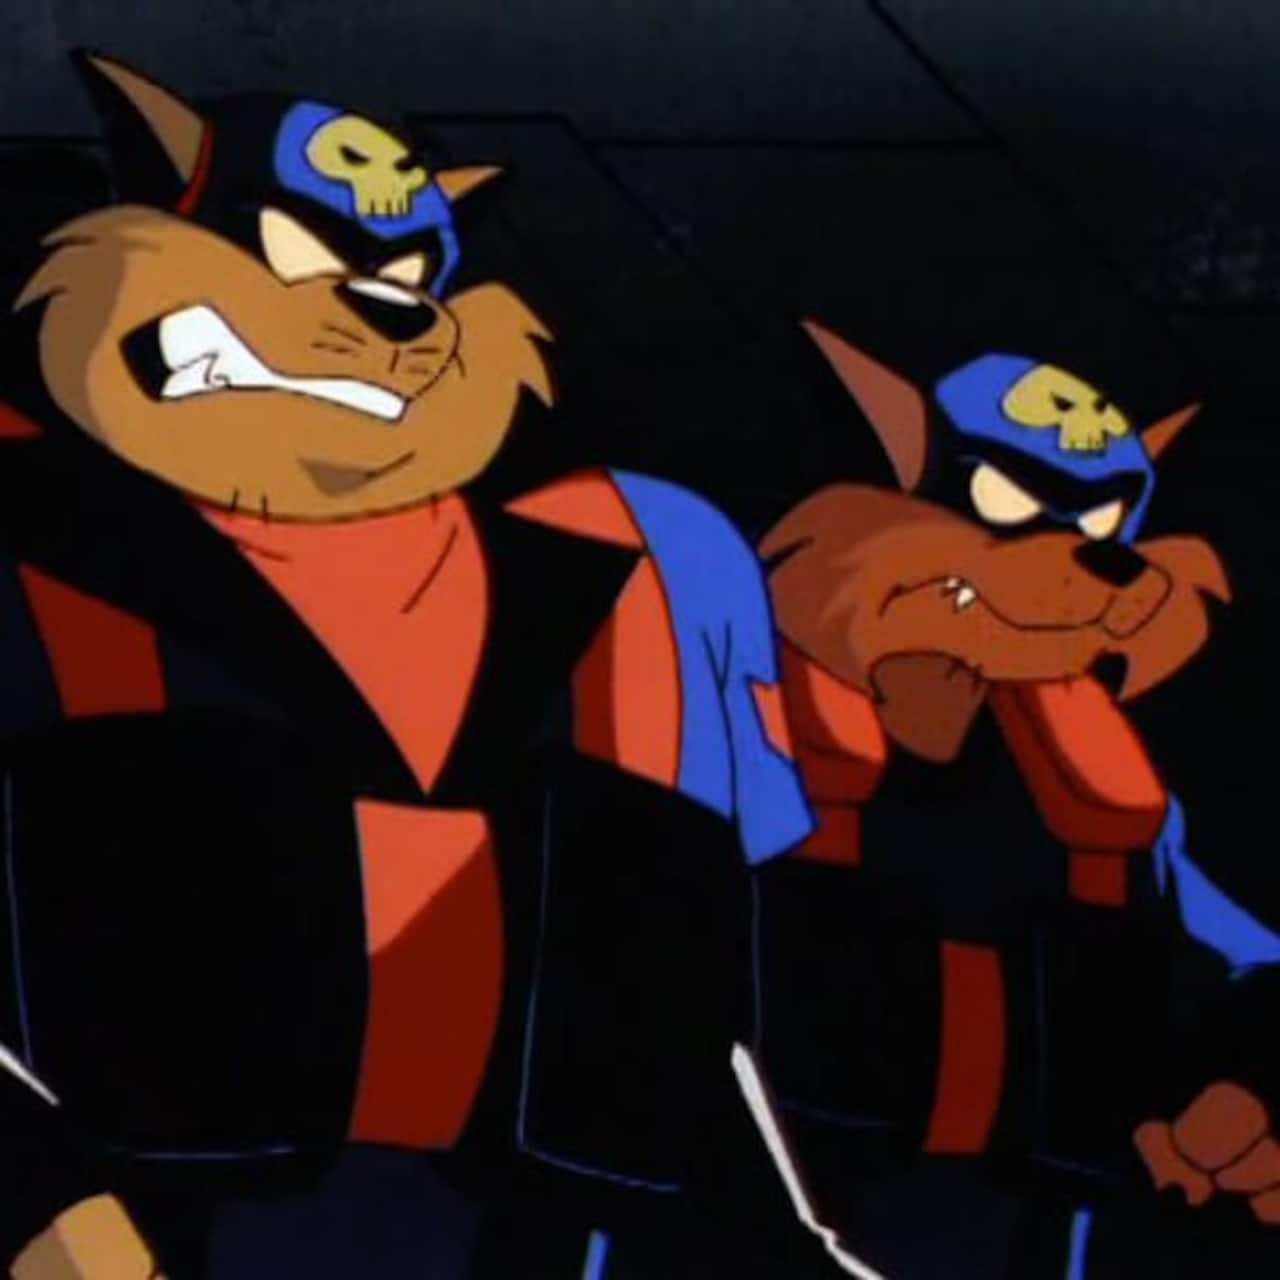 SWAT Kats, Johnny Bravo, The Powerpuff Girls: 7 animated shows that could  be turned into supremely entertaining films